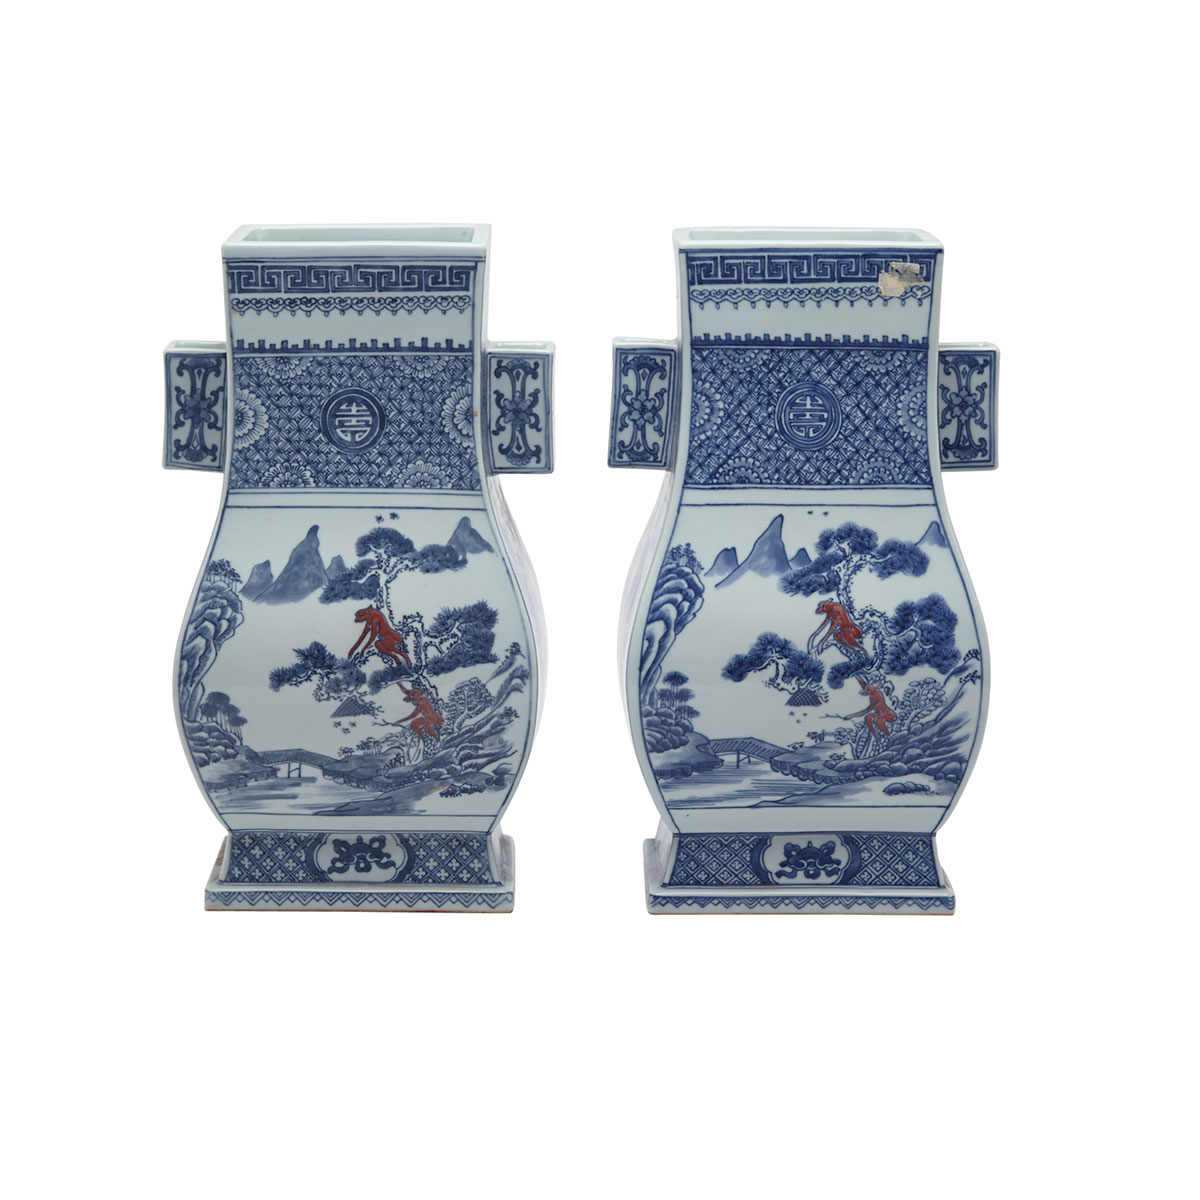 Pair of Blue, White, and Copper Red Hu Vases, Republican Period